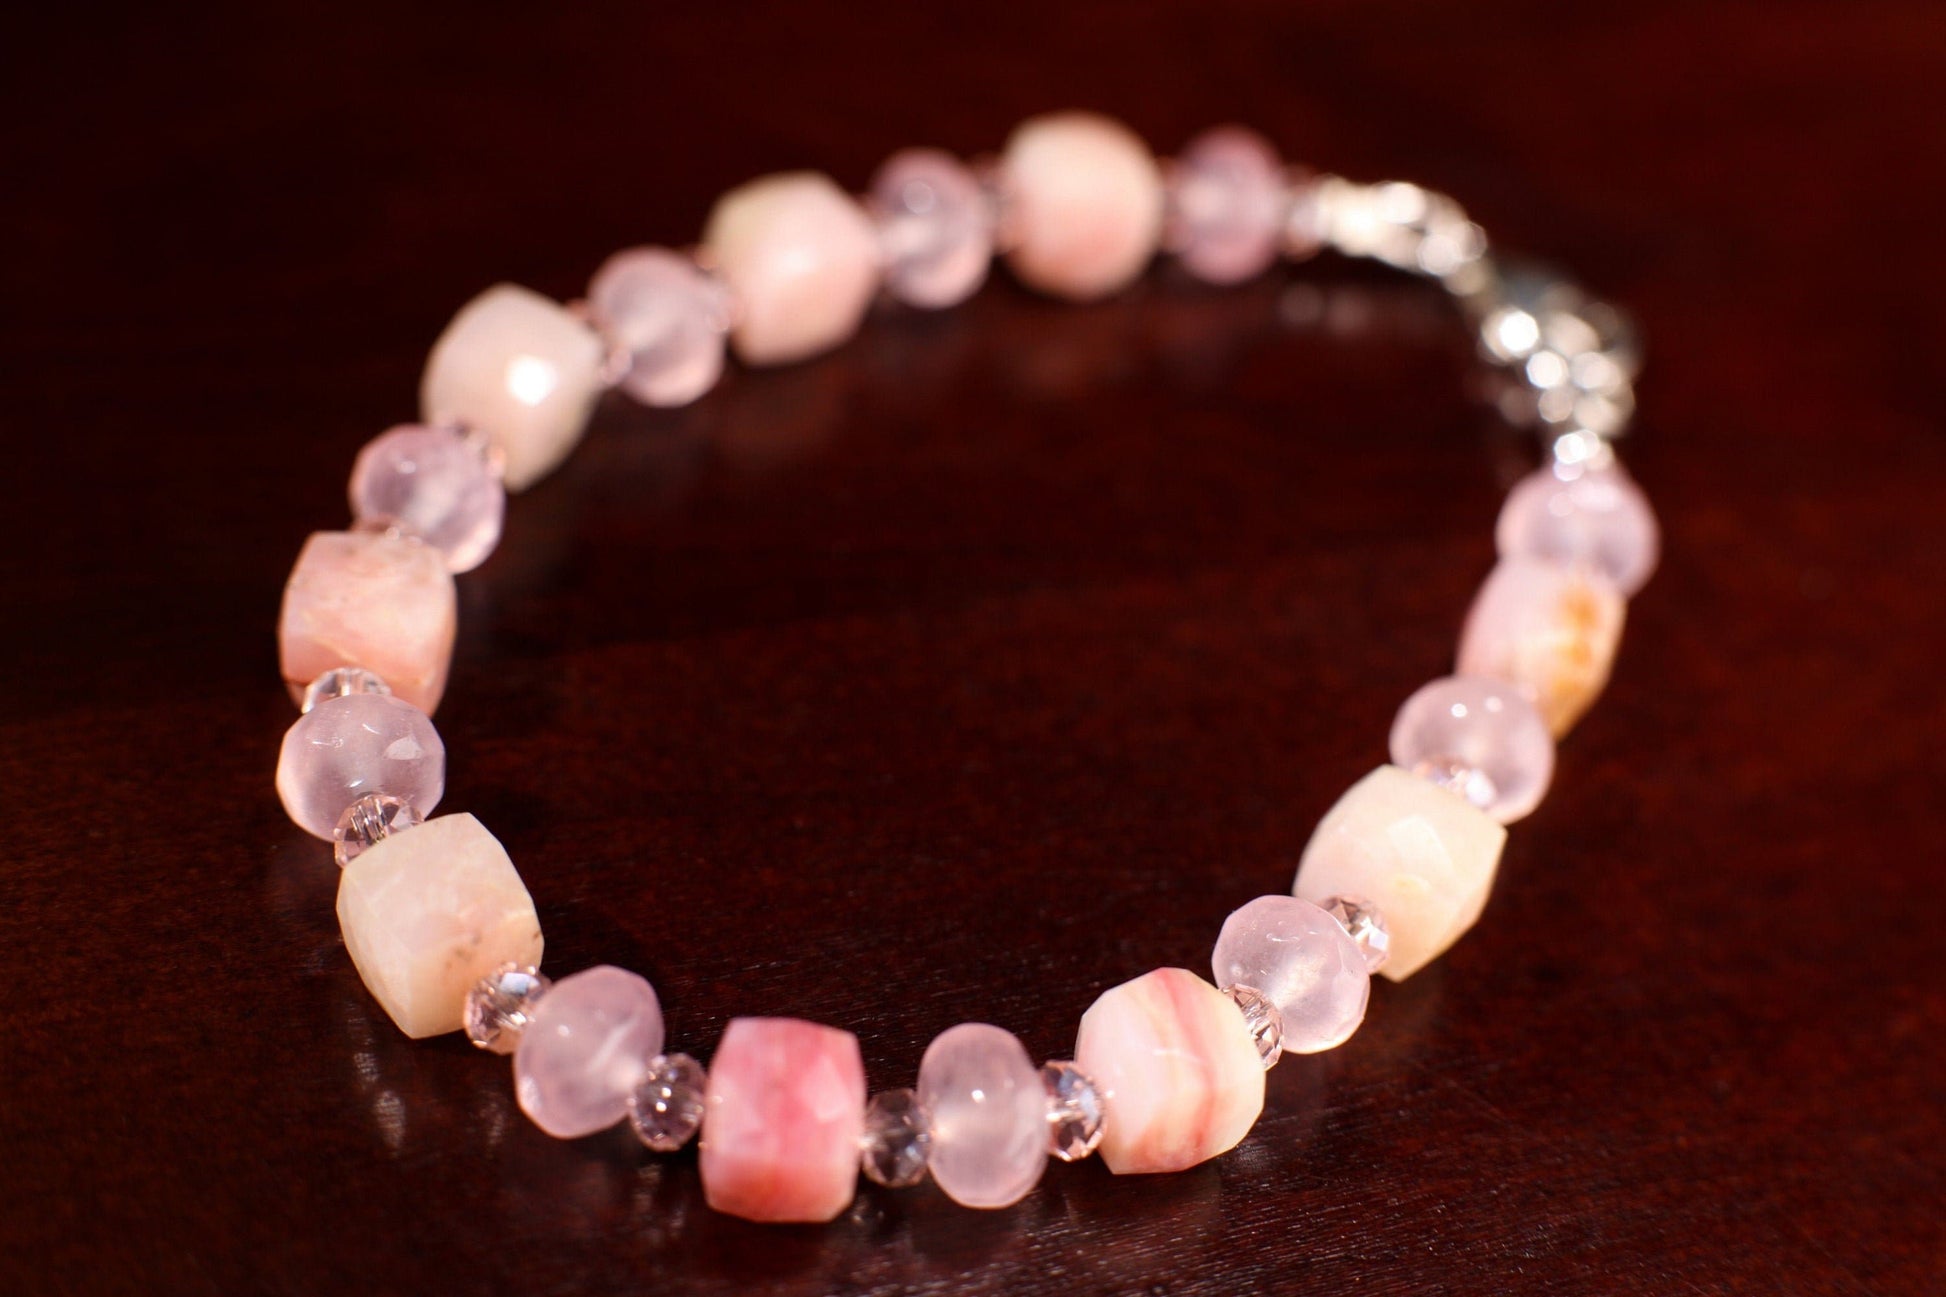 Natural Pink Peruvian Opal 8mm Cube Bracelet Accent with 8mm Rose Quartz roundel Spacer in 925 Sterling Silver Clasp,love, Valentine gift